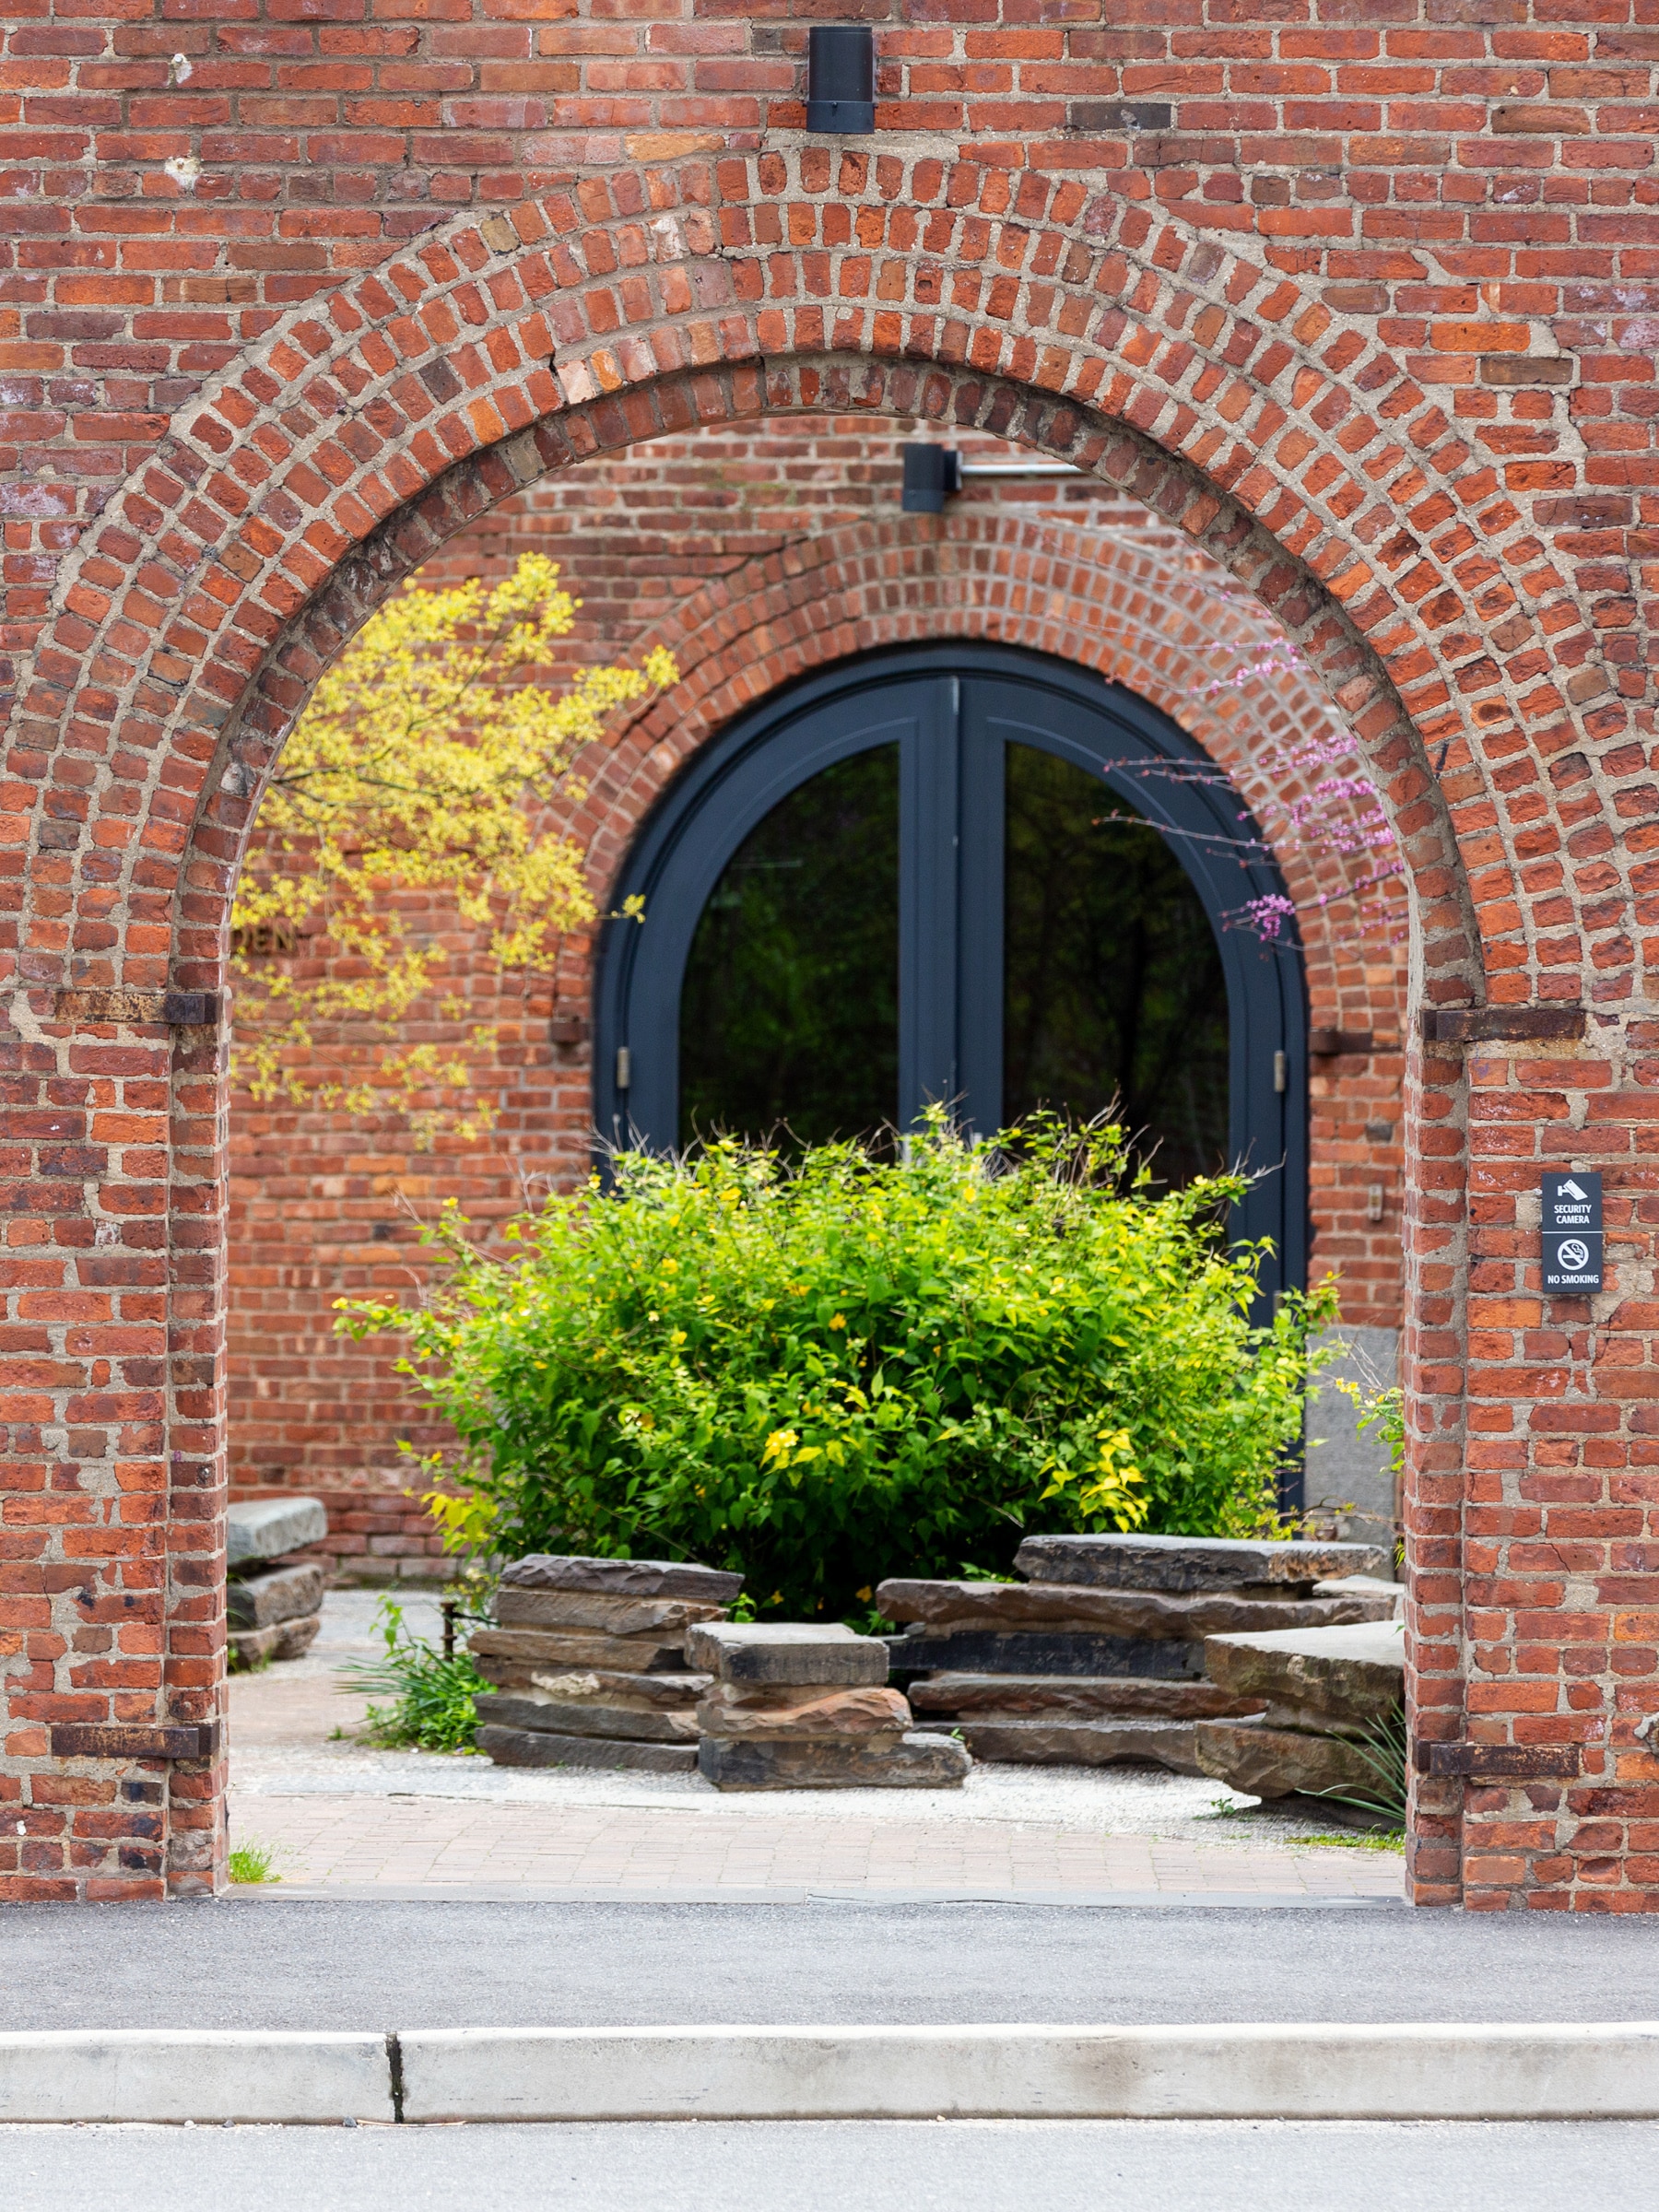 Bush and stone seating seen through brick archway in Max Family Garden.